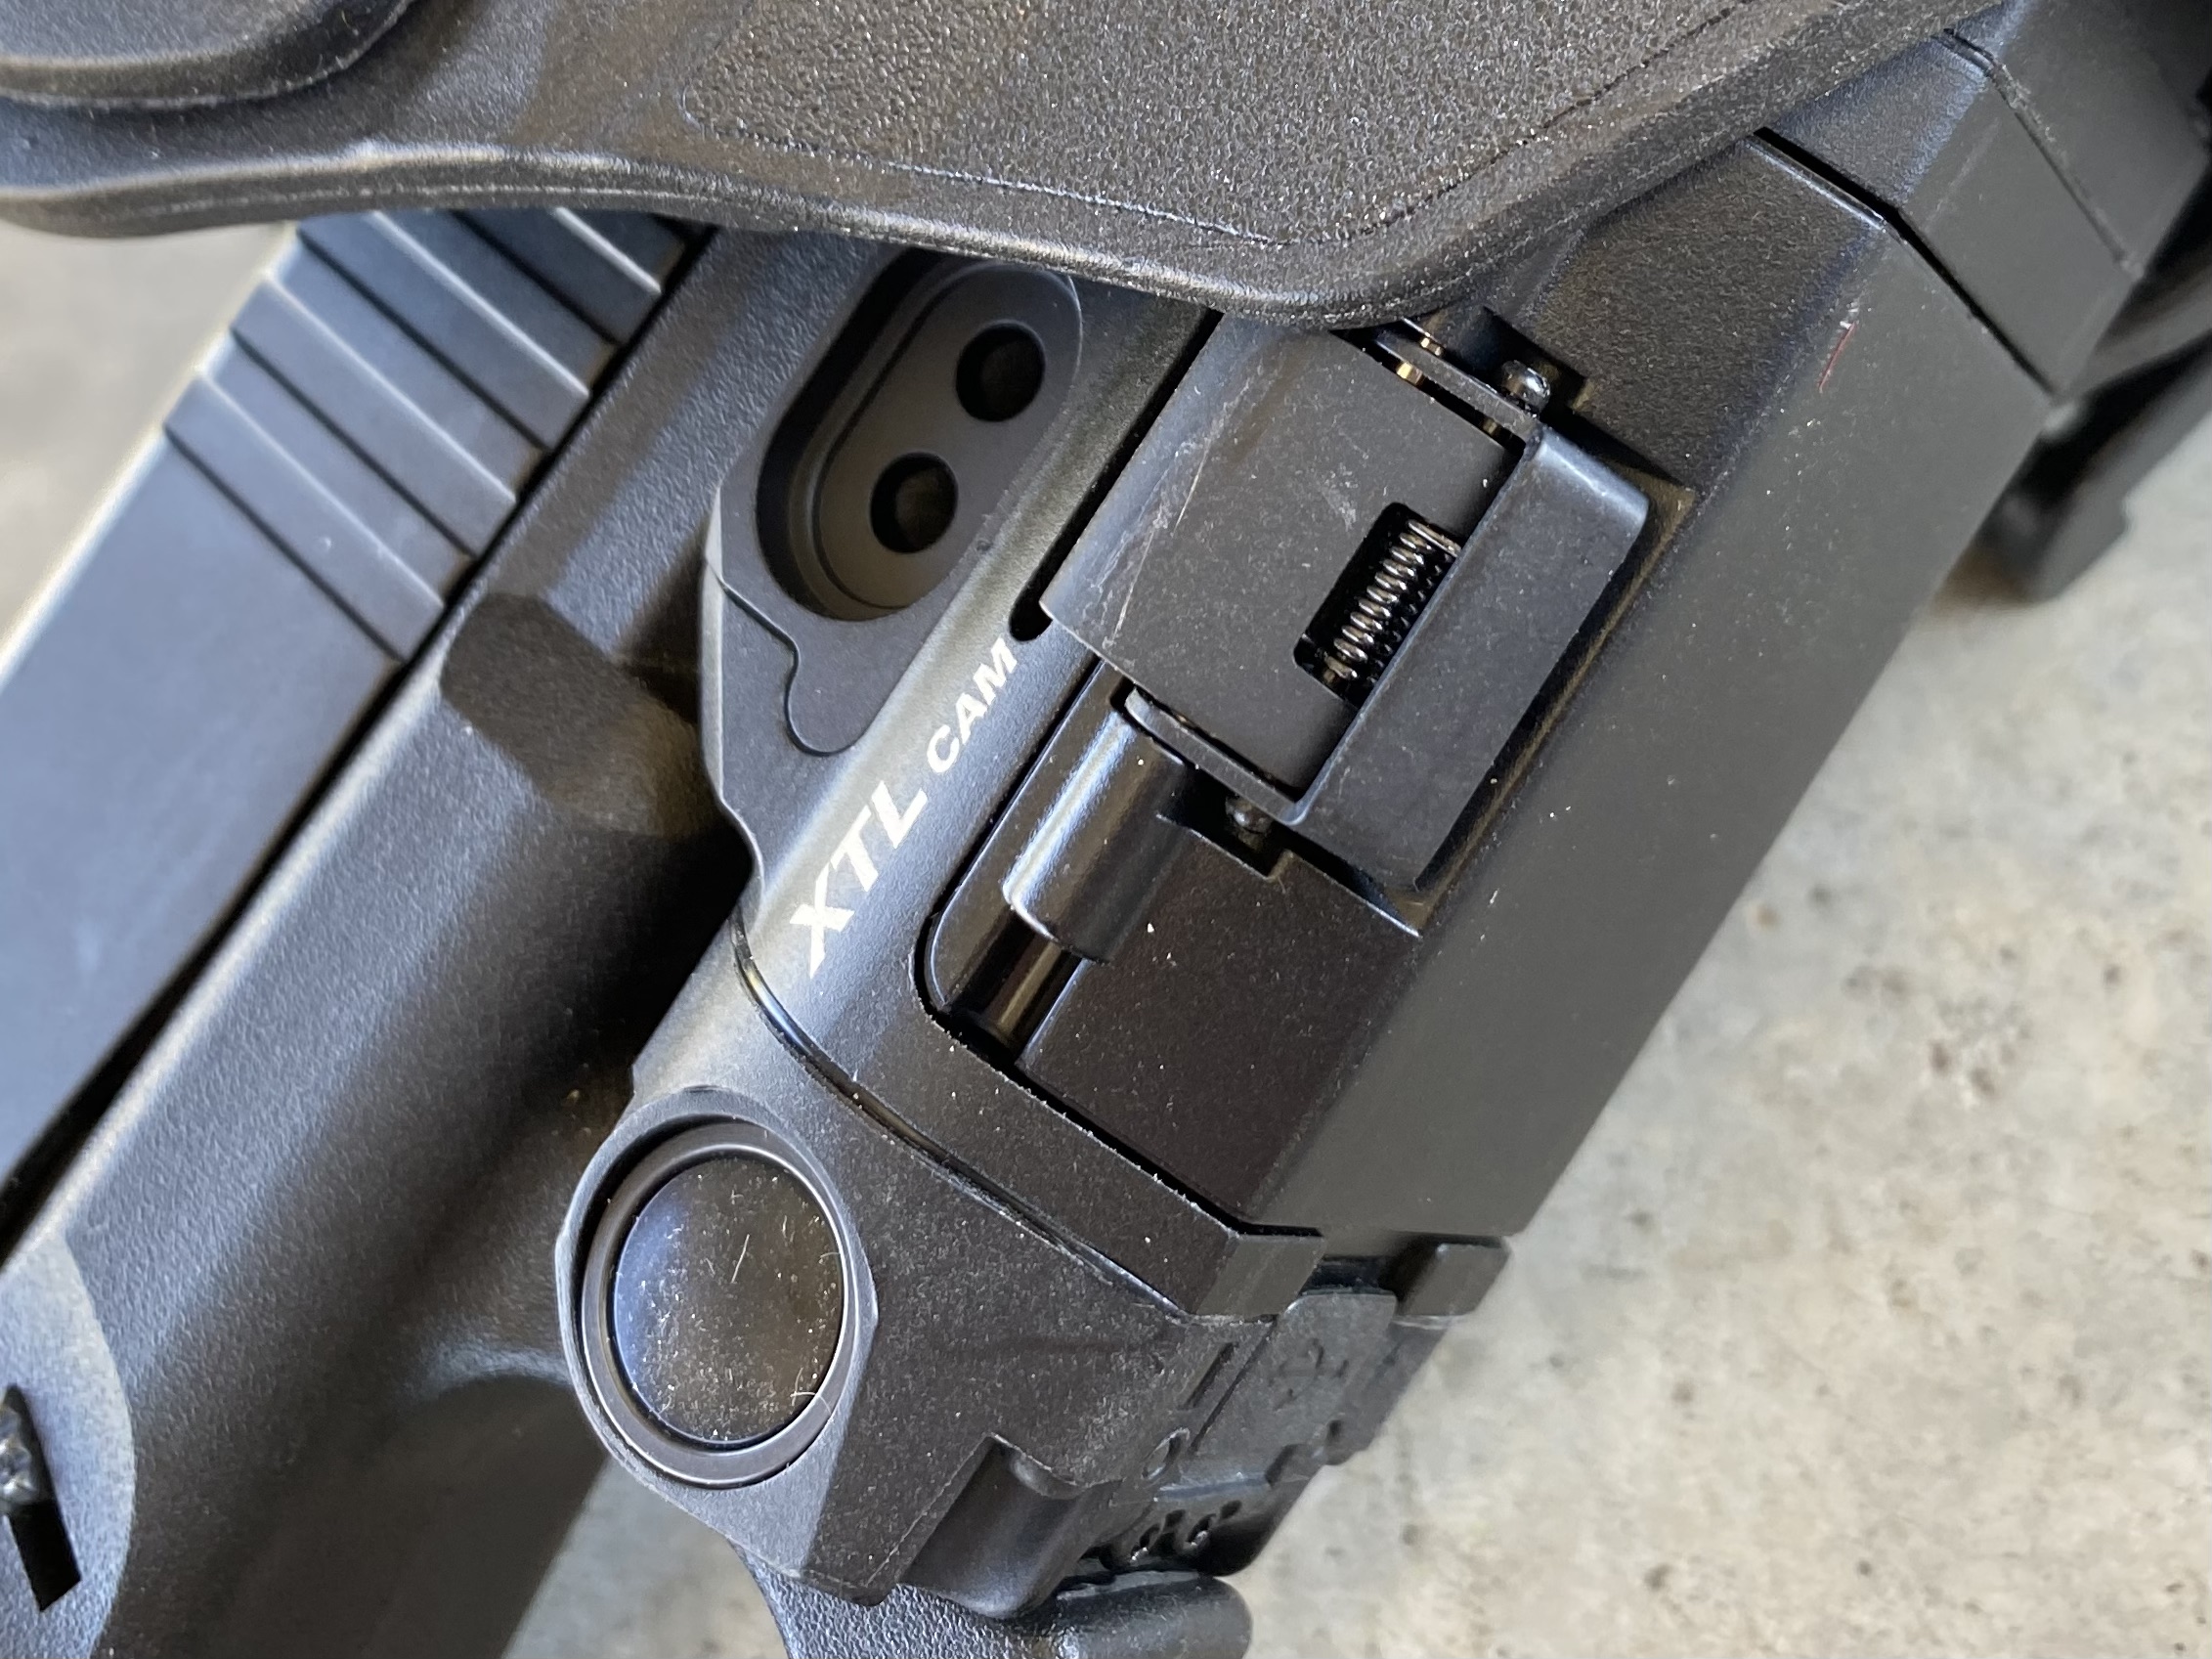 The unit attaches like most other lights. If there's a hang-up on a holster, it will be where the battery latch clips to the unit, but that's rare. 